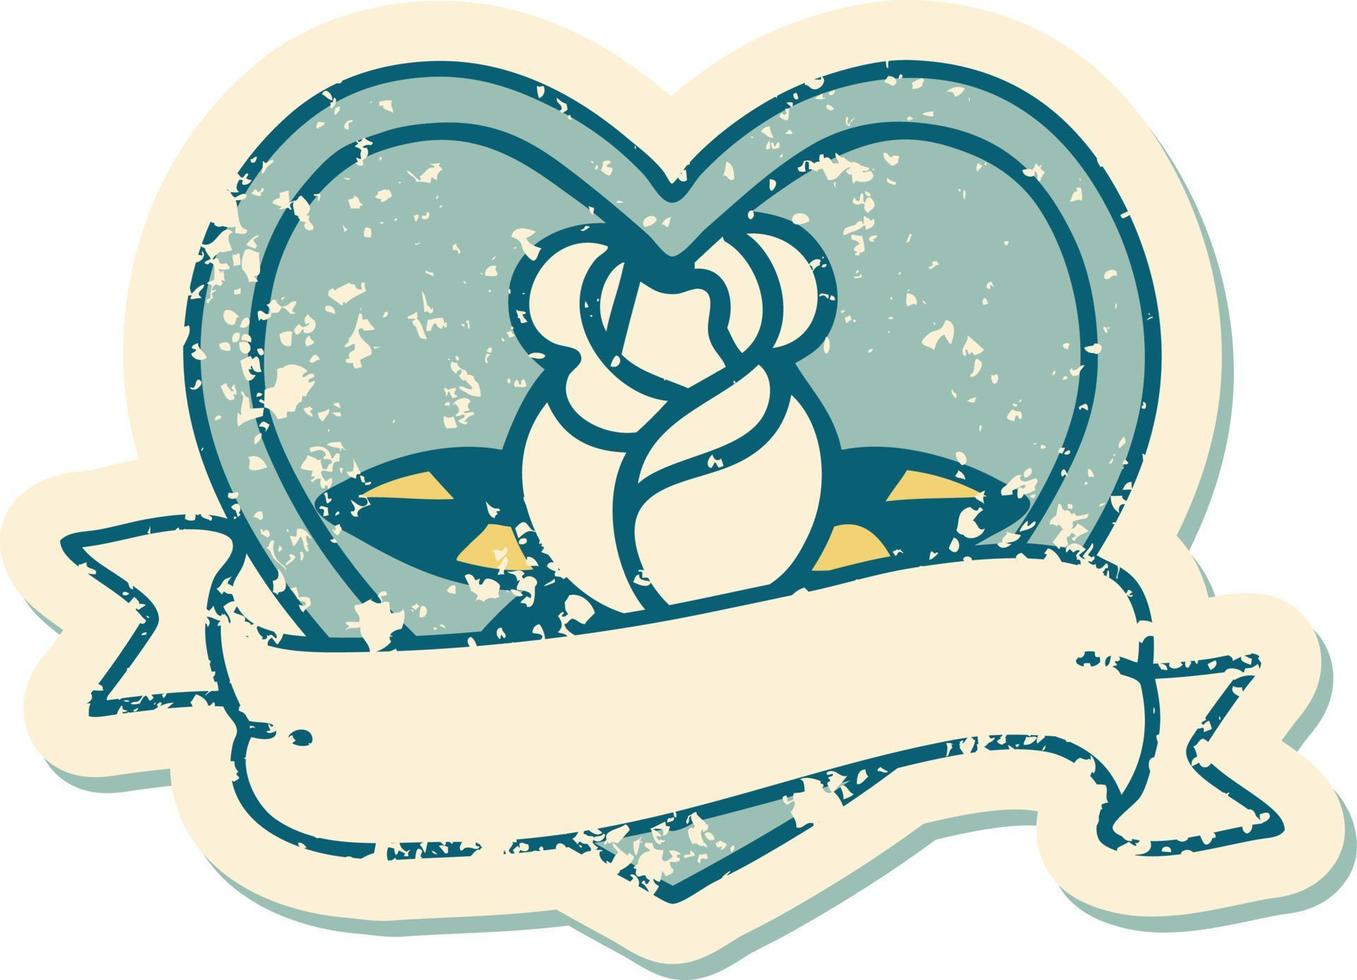 iconic distressed sticker tattoo style image of a heart rose and banner vector